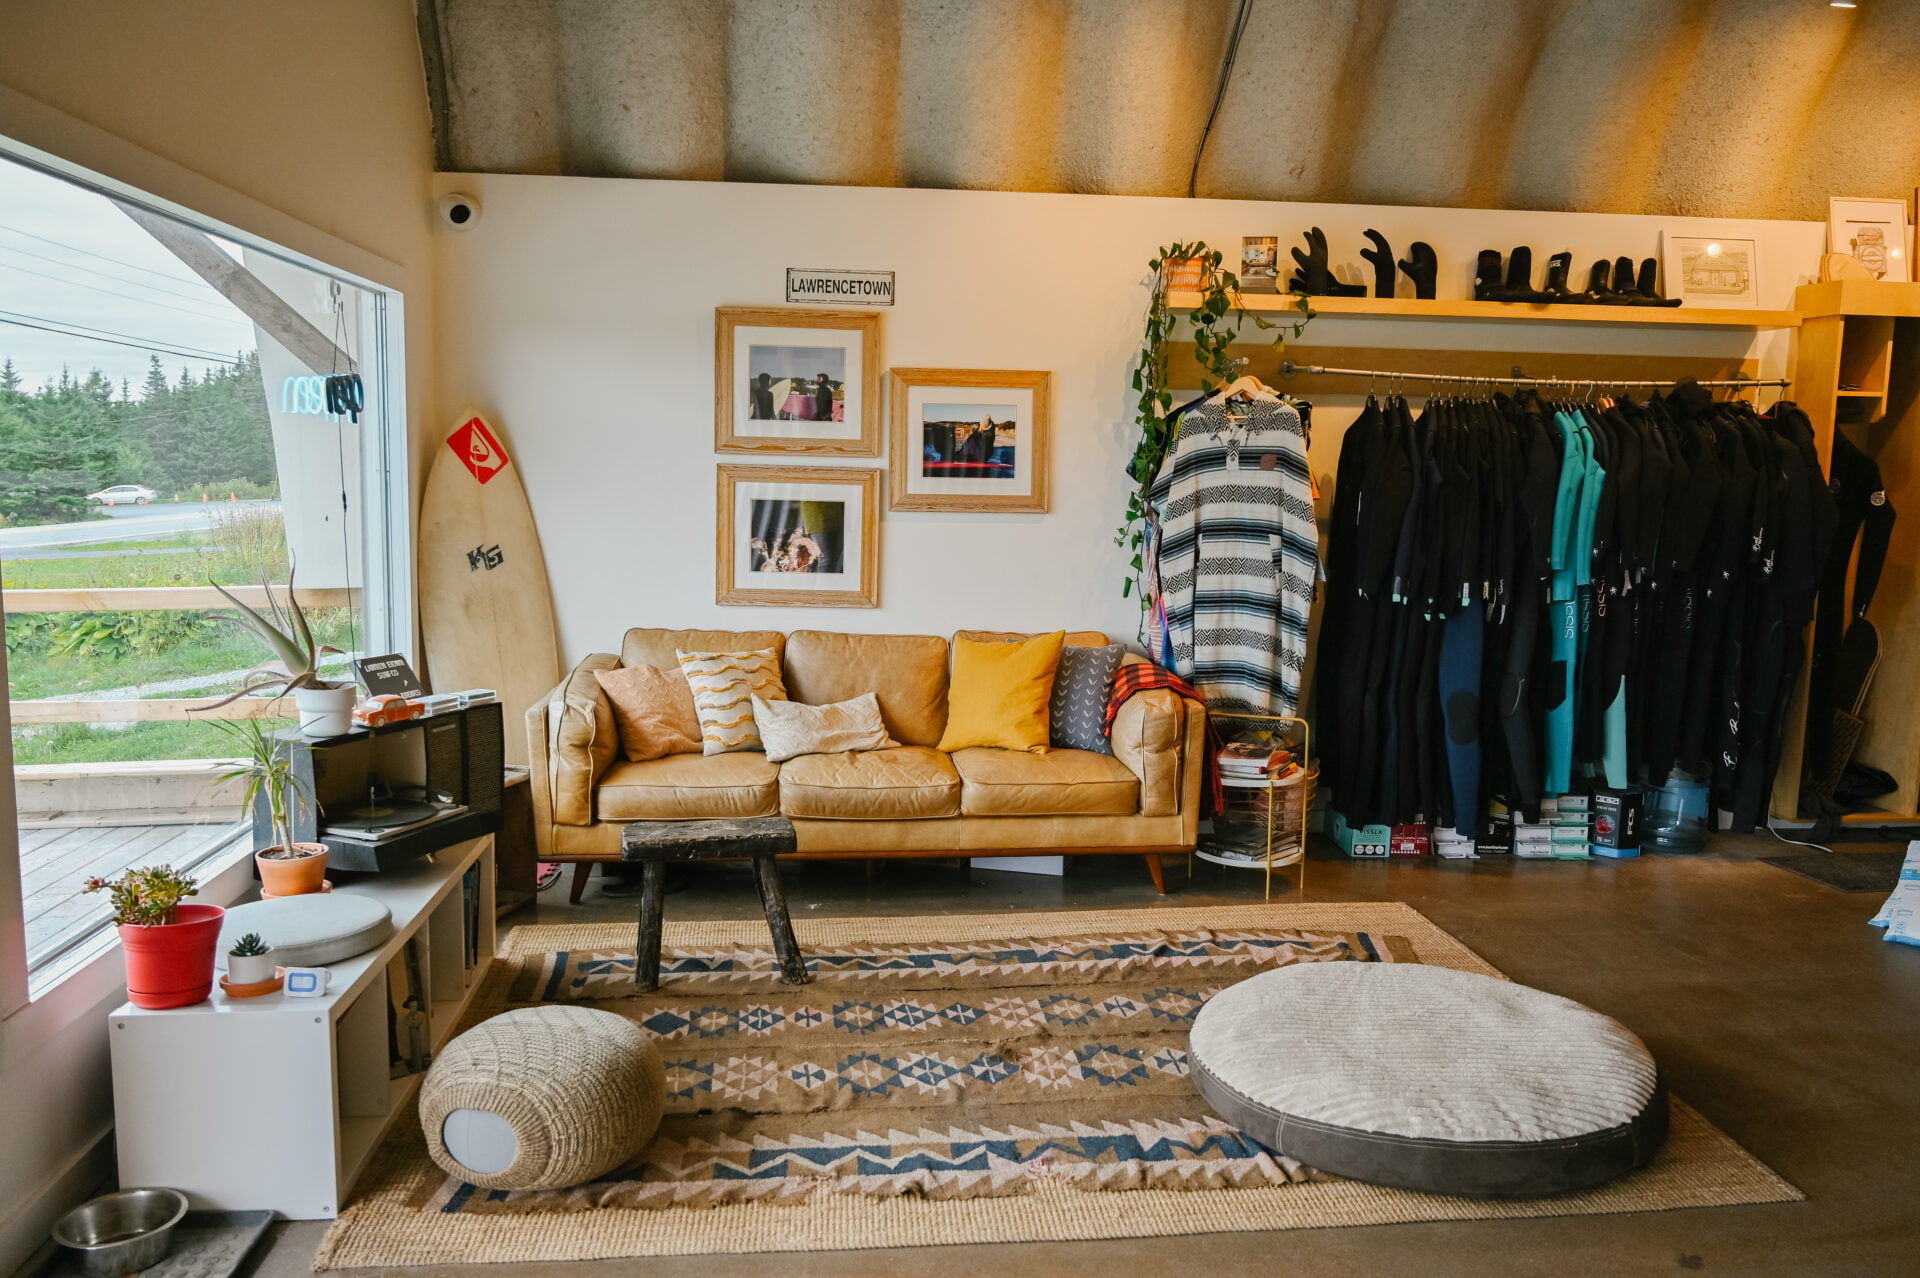 inside view of the lawrencetown surf co. shop in nova scotia